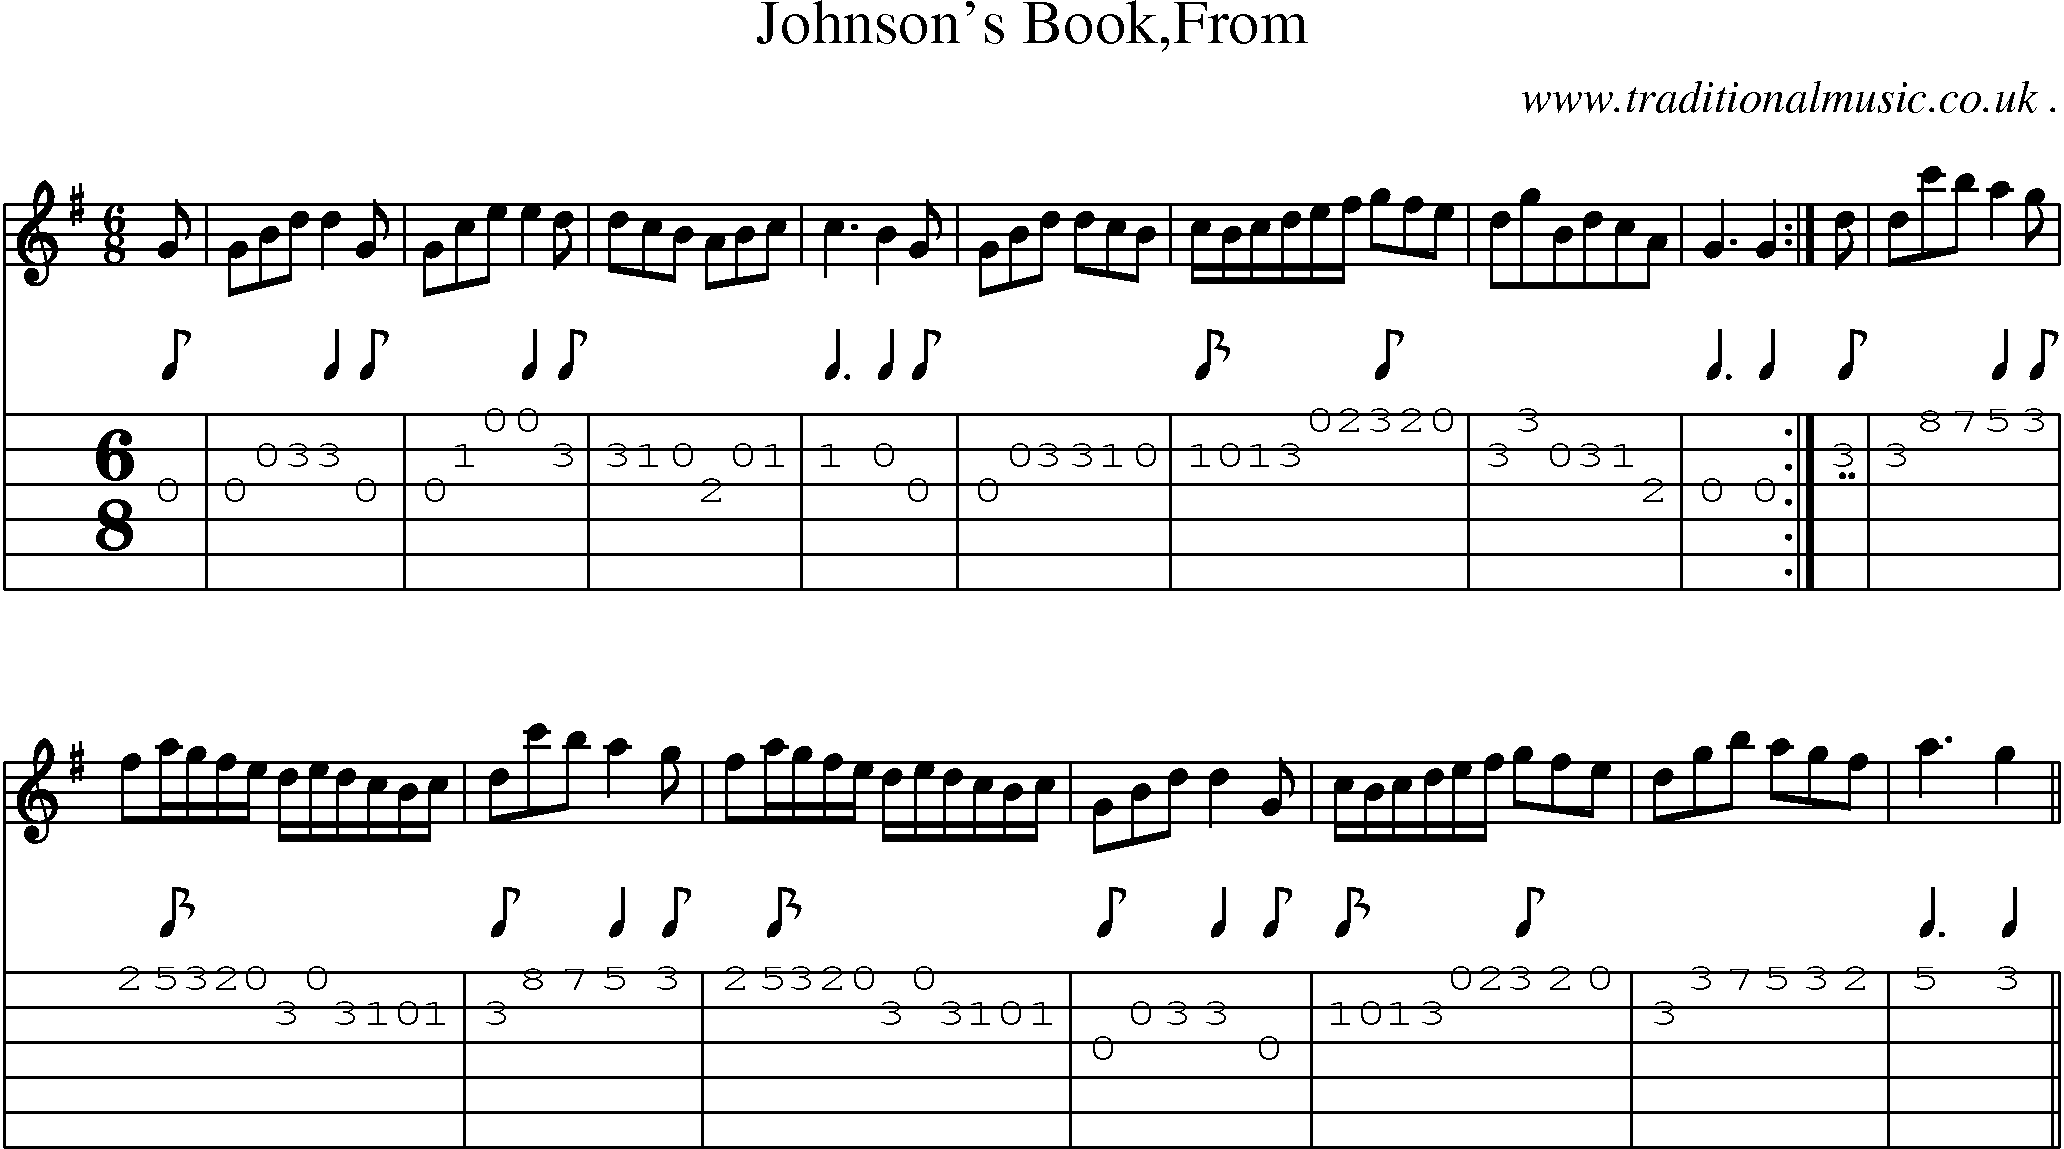 Sheet-Music and Guitar Tabs for Johnsons Bookfrom